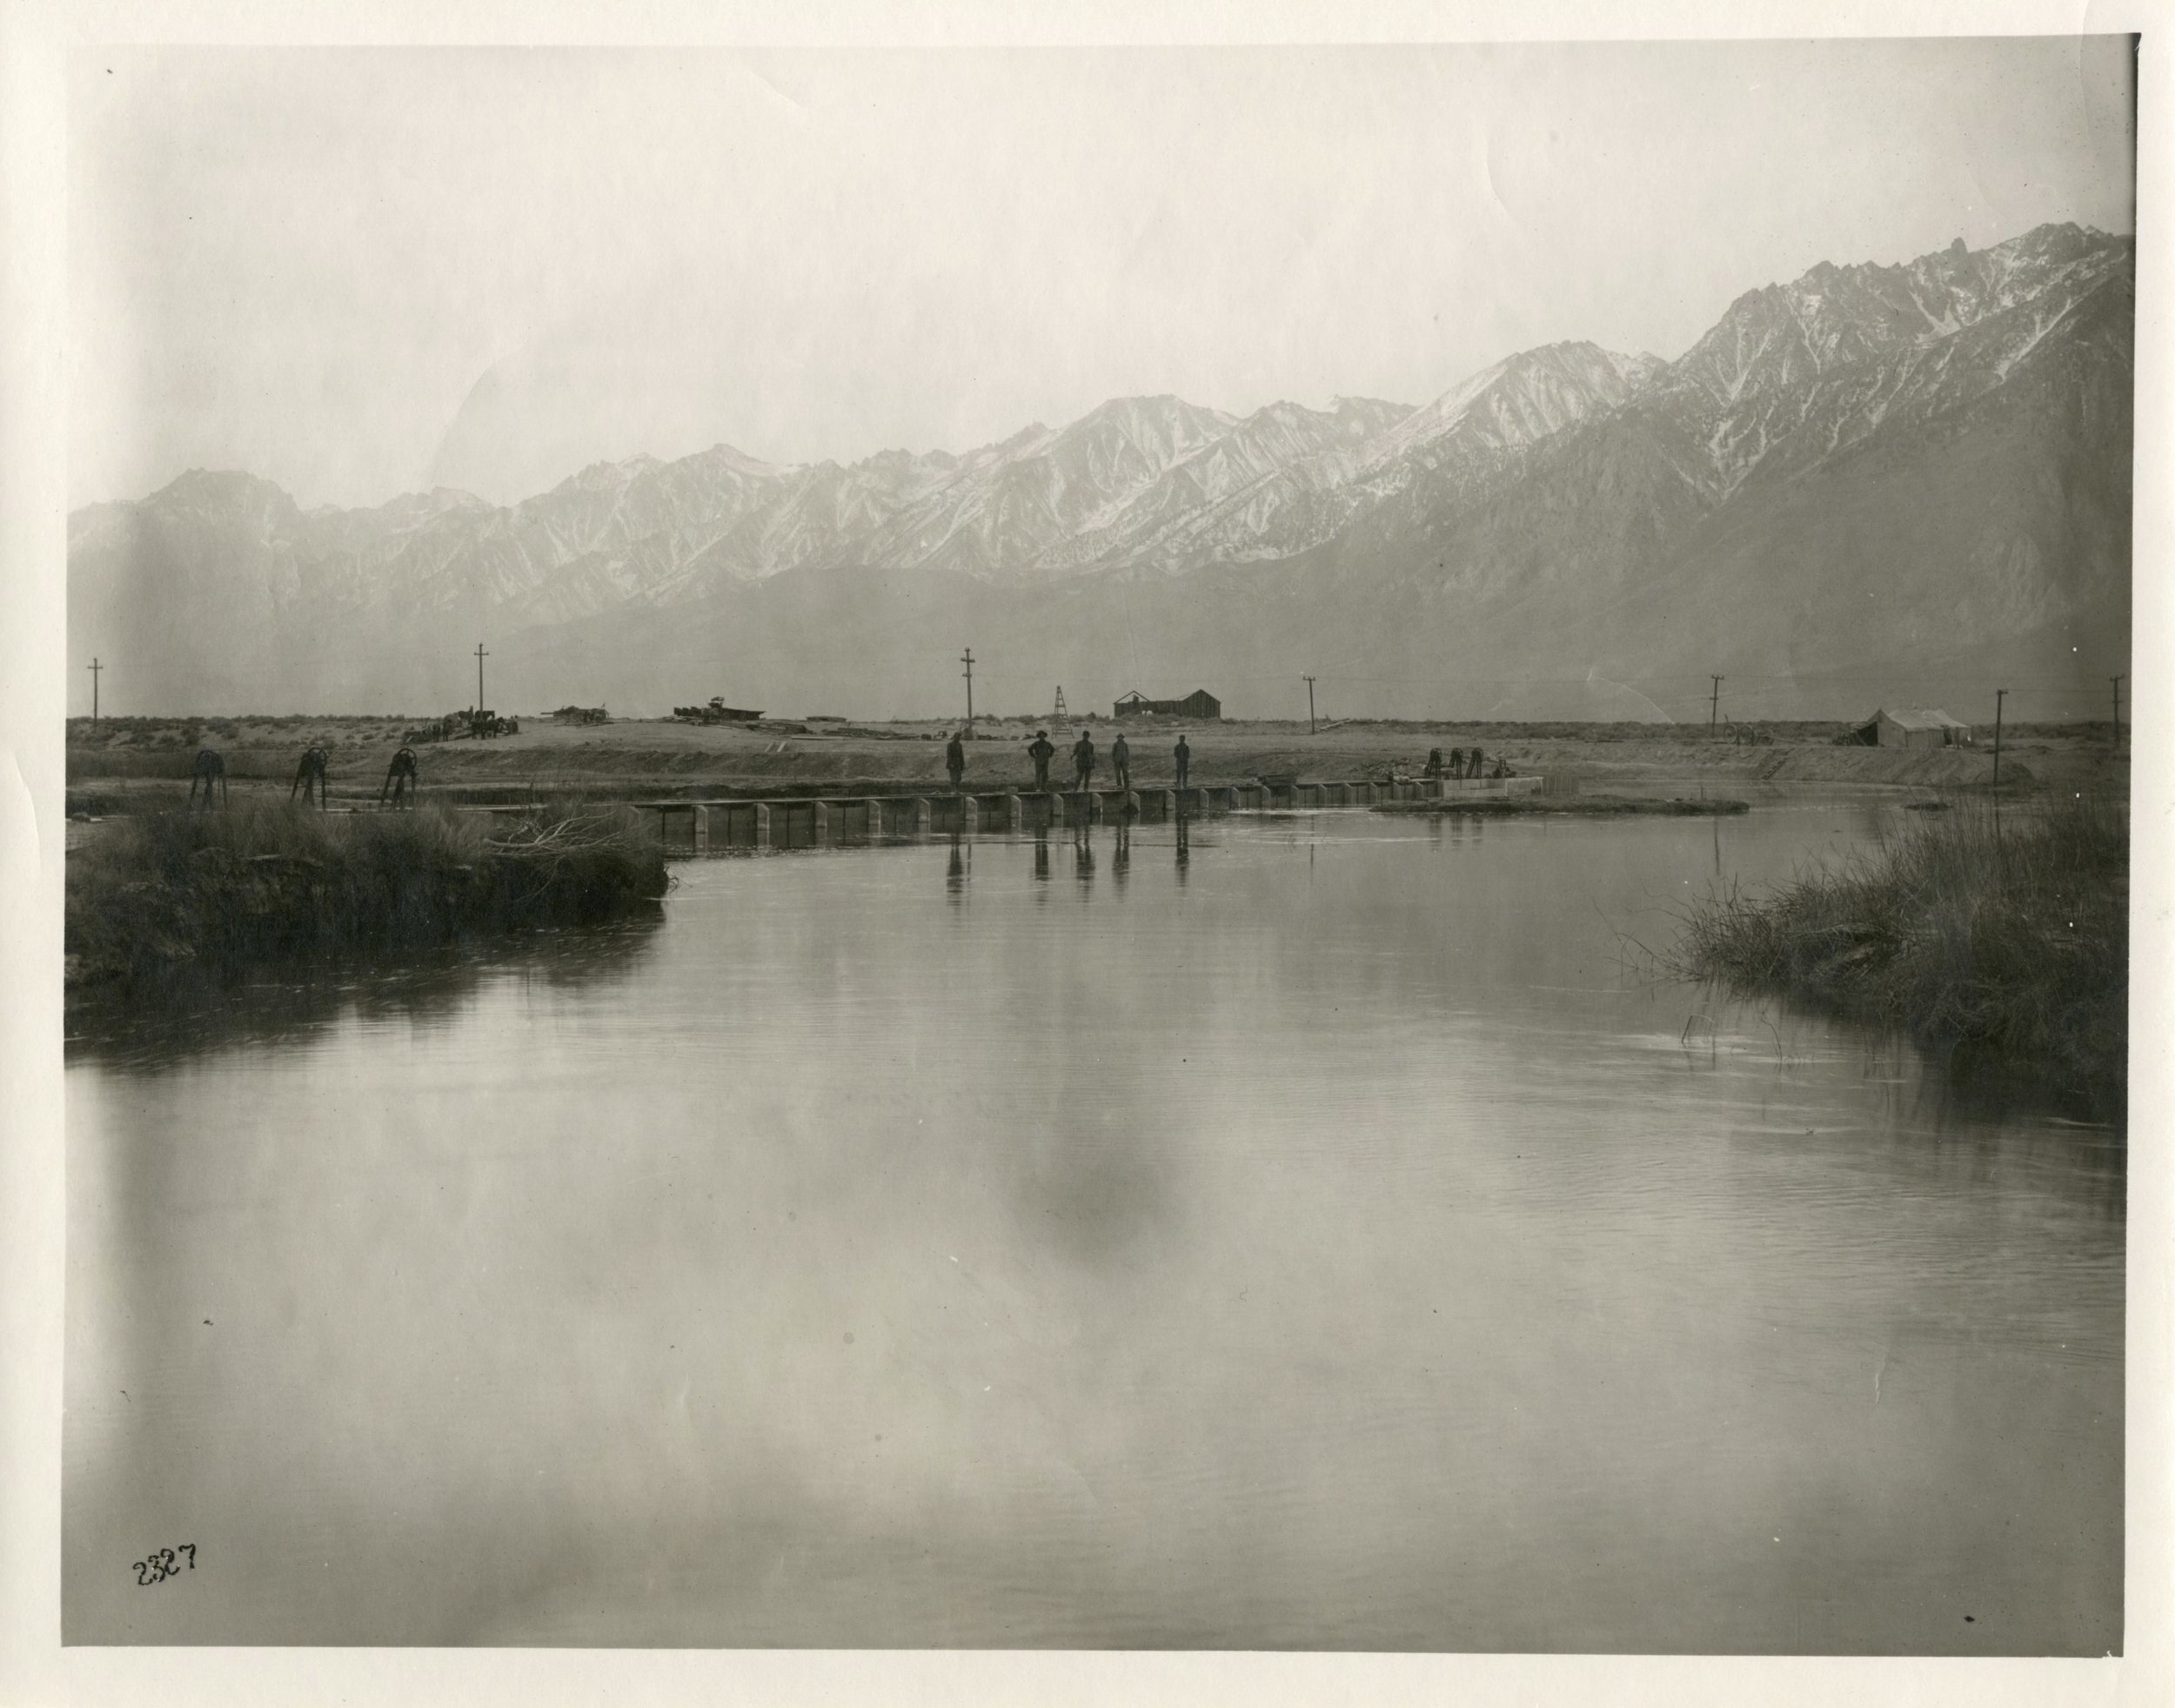  LA Aqueduct Diversion Weir part of the Headworks of the Los Angeles Aqueduct, 1913 